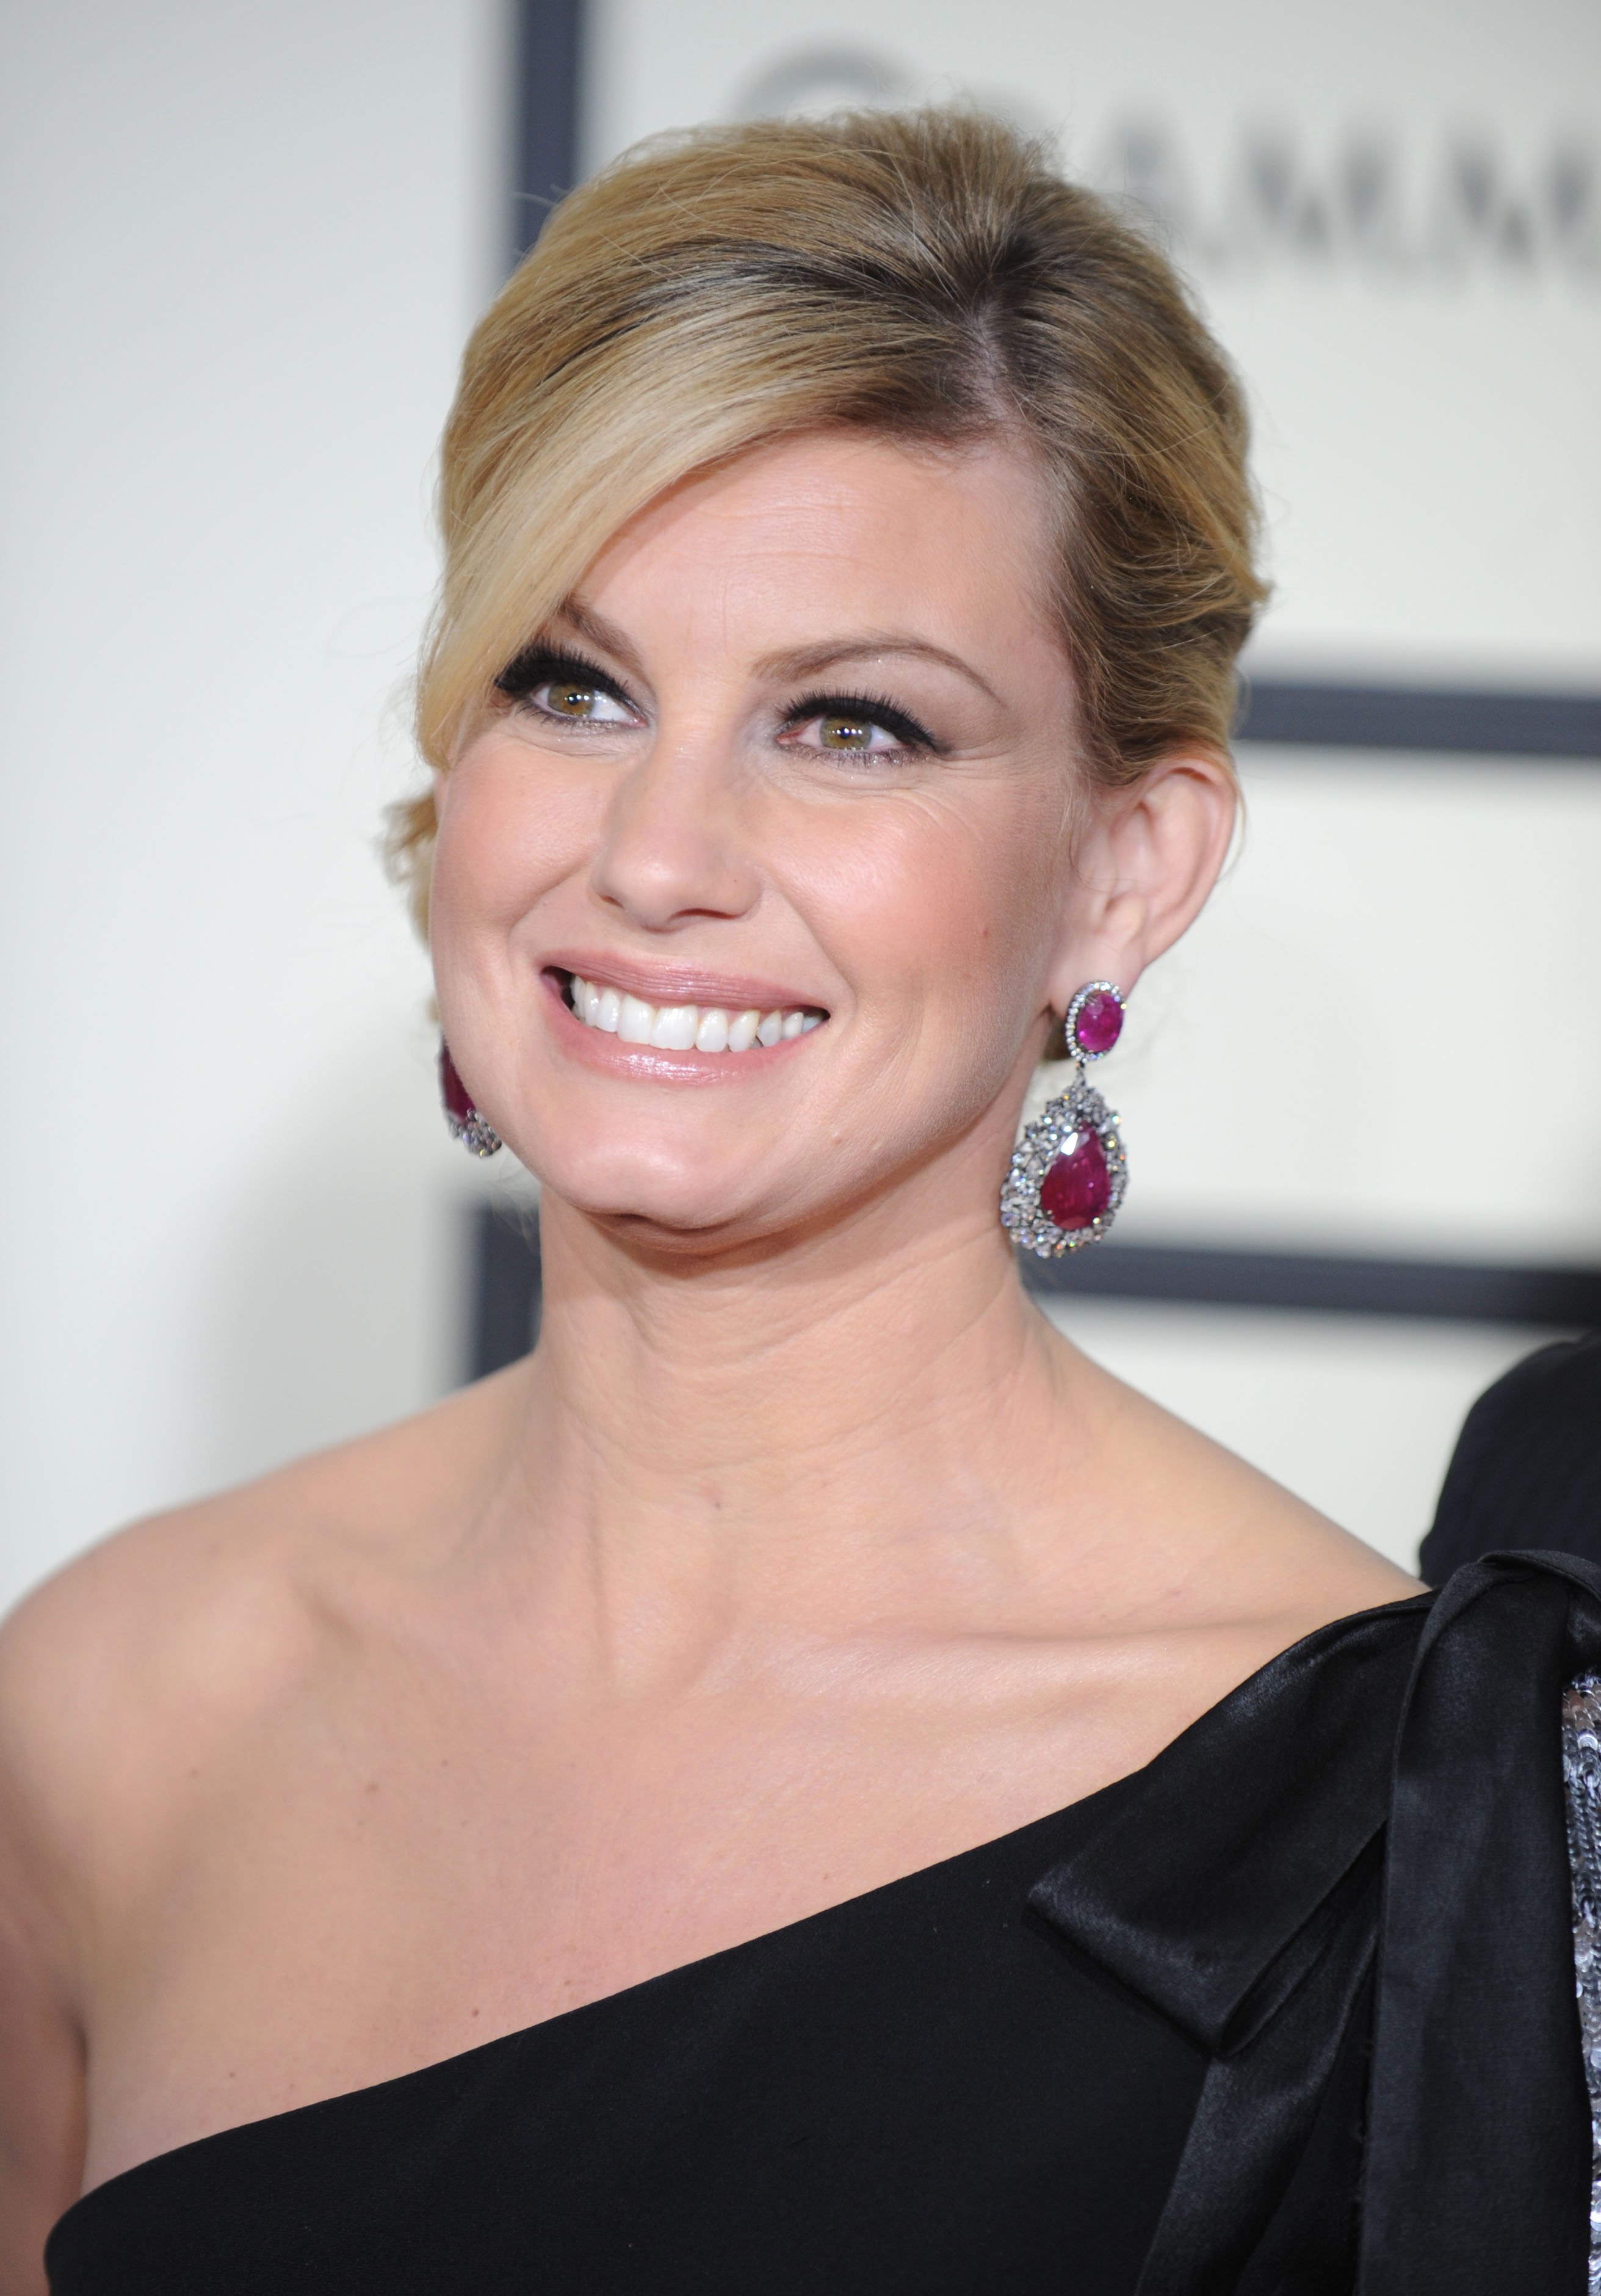 Singer Faith Hill arrives to the 50th Annual GRAMMY Awards at the Staples Center on February 10, 2008 in Los Angeles, California. | Source: Getty Images